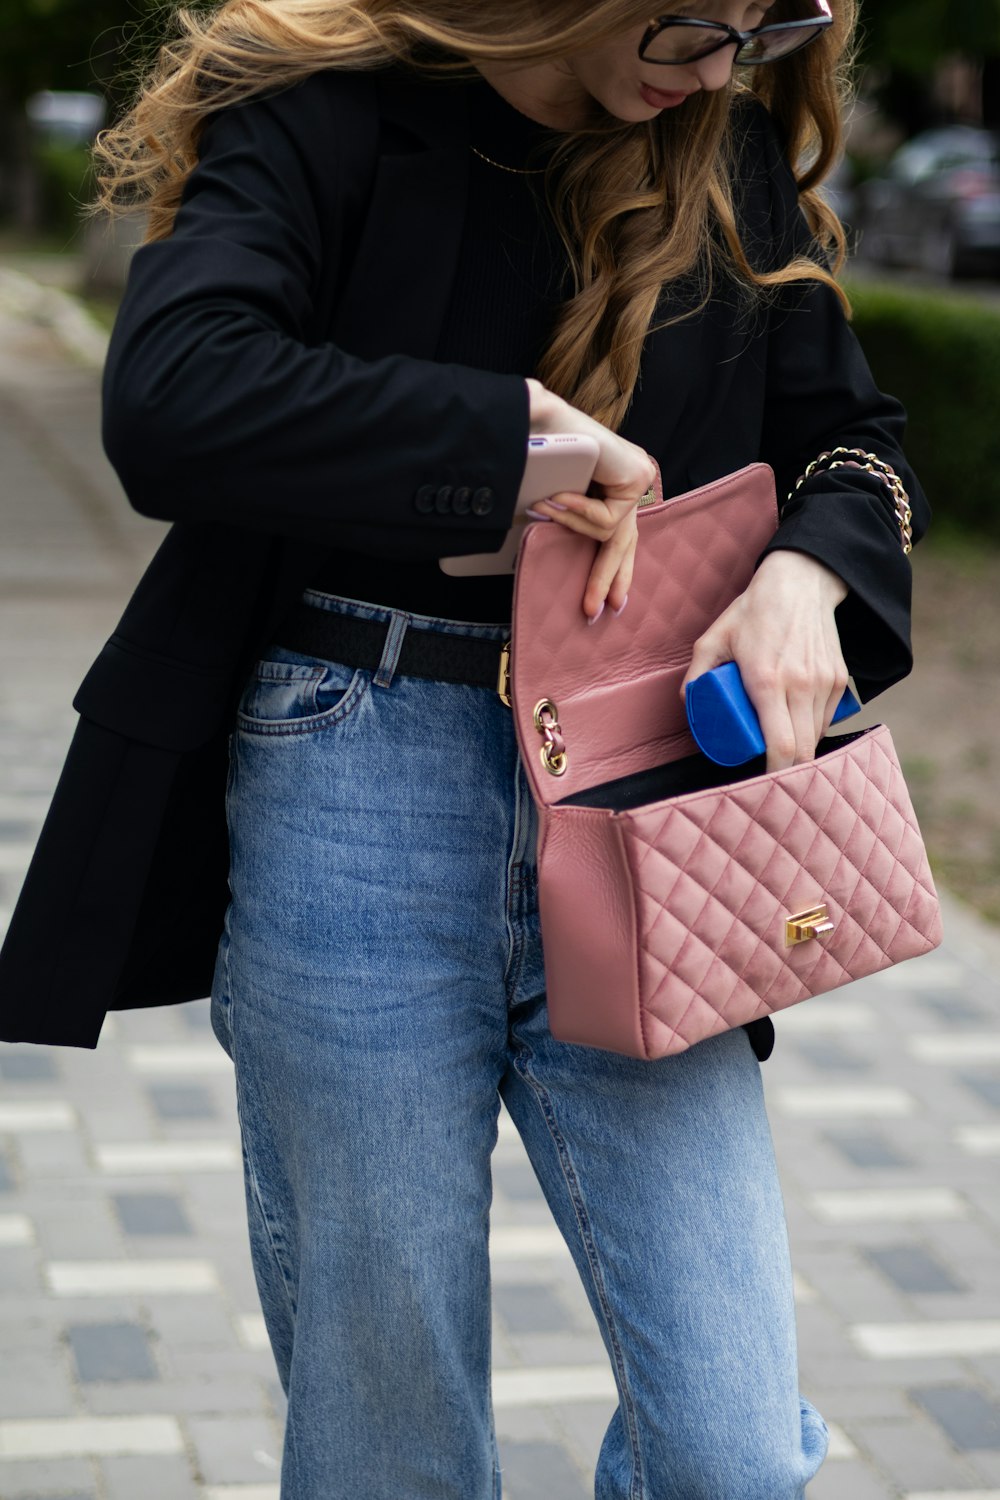 a woman holding a pink purse and a cell phone